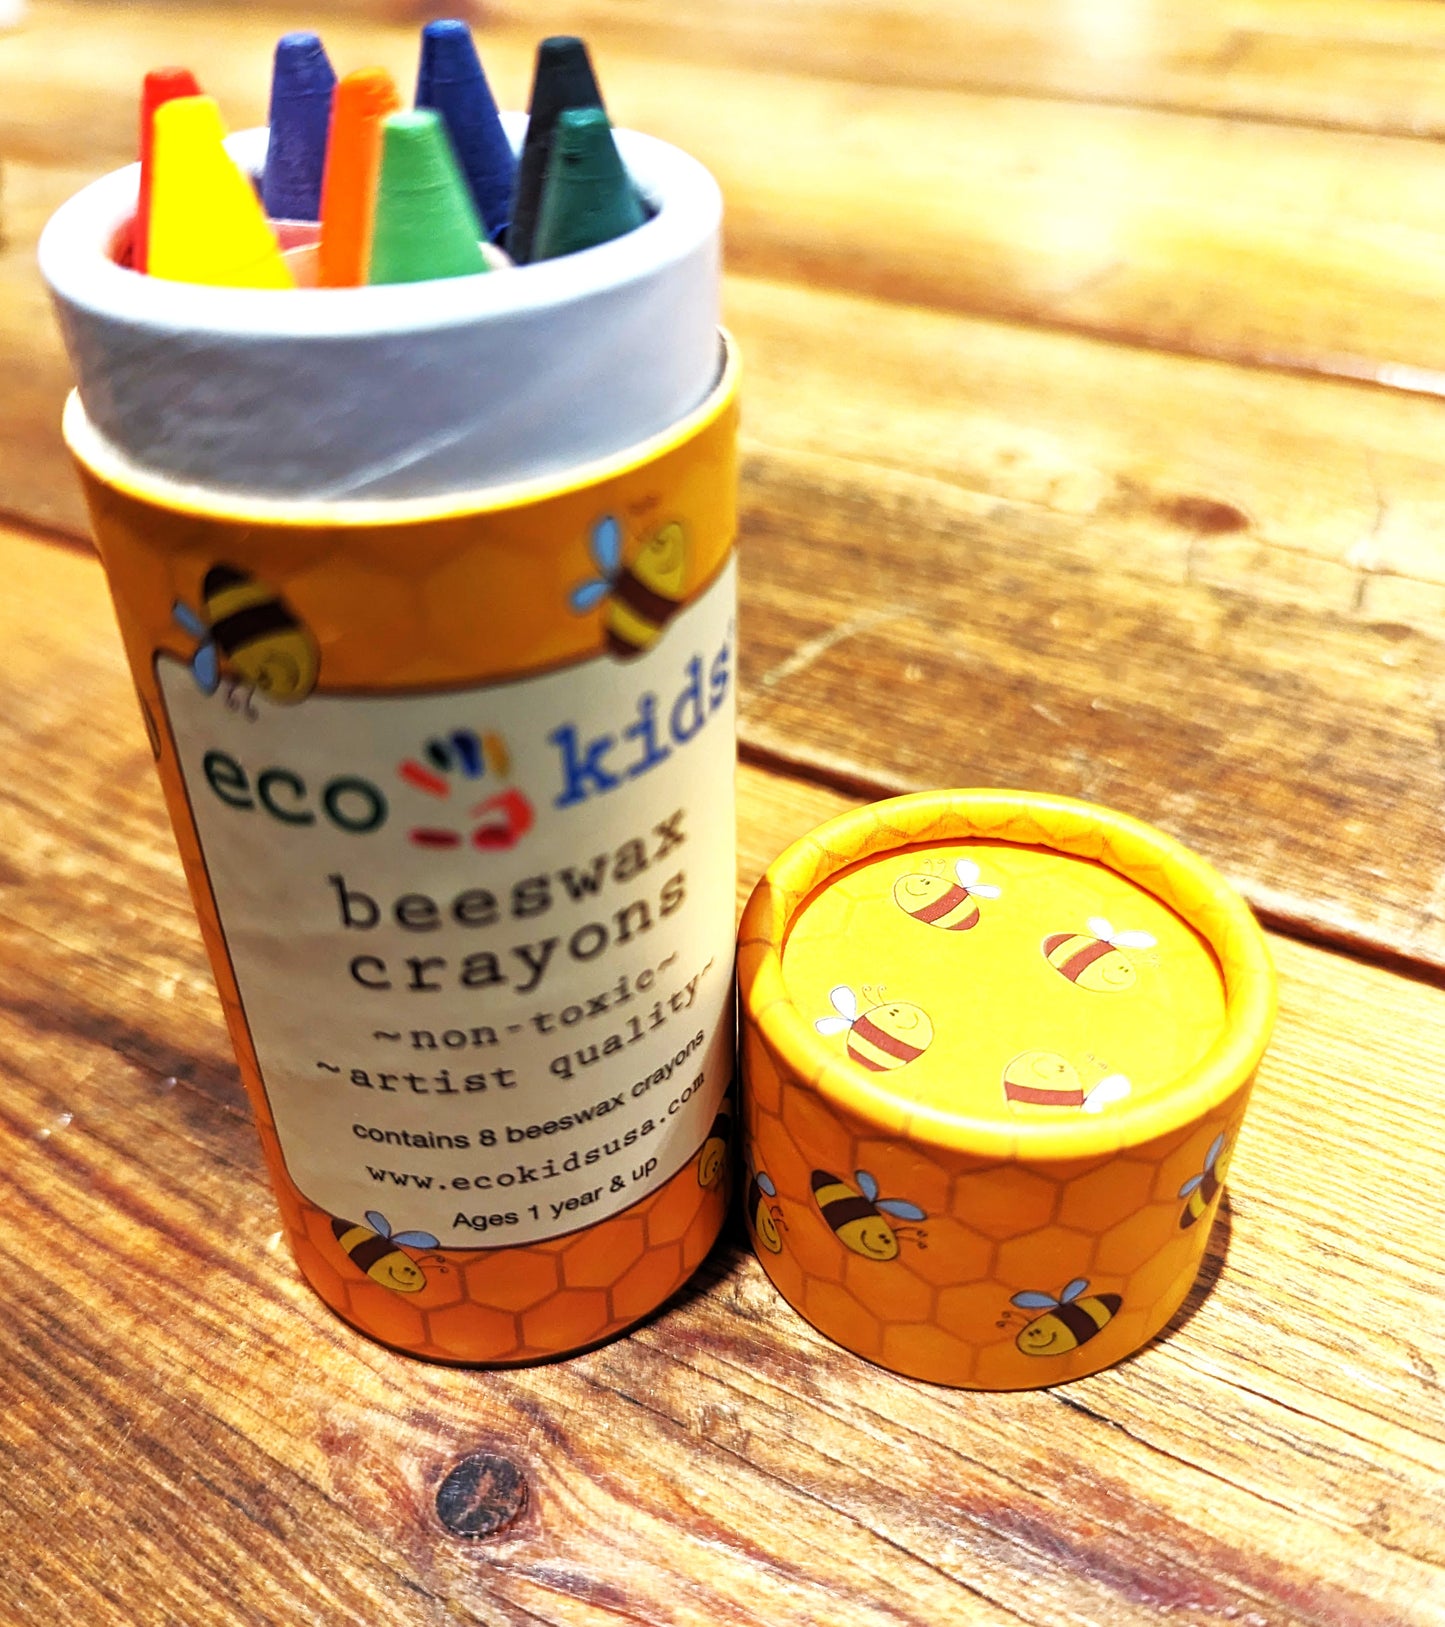 Eco Kids Beeswax Crayons In Travel Case